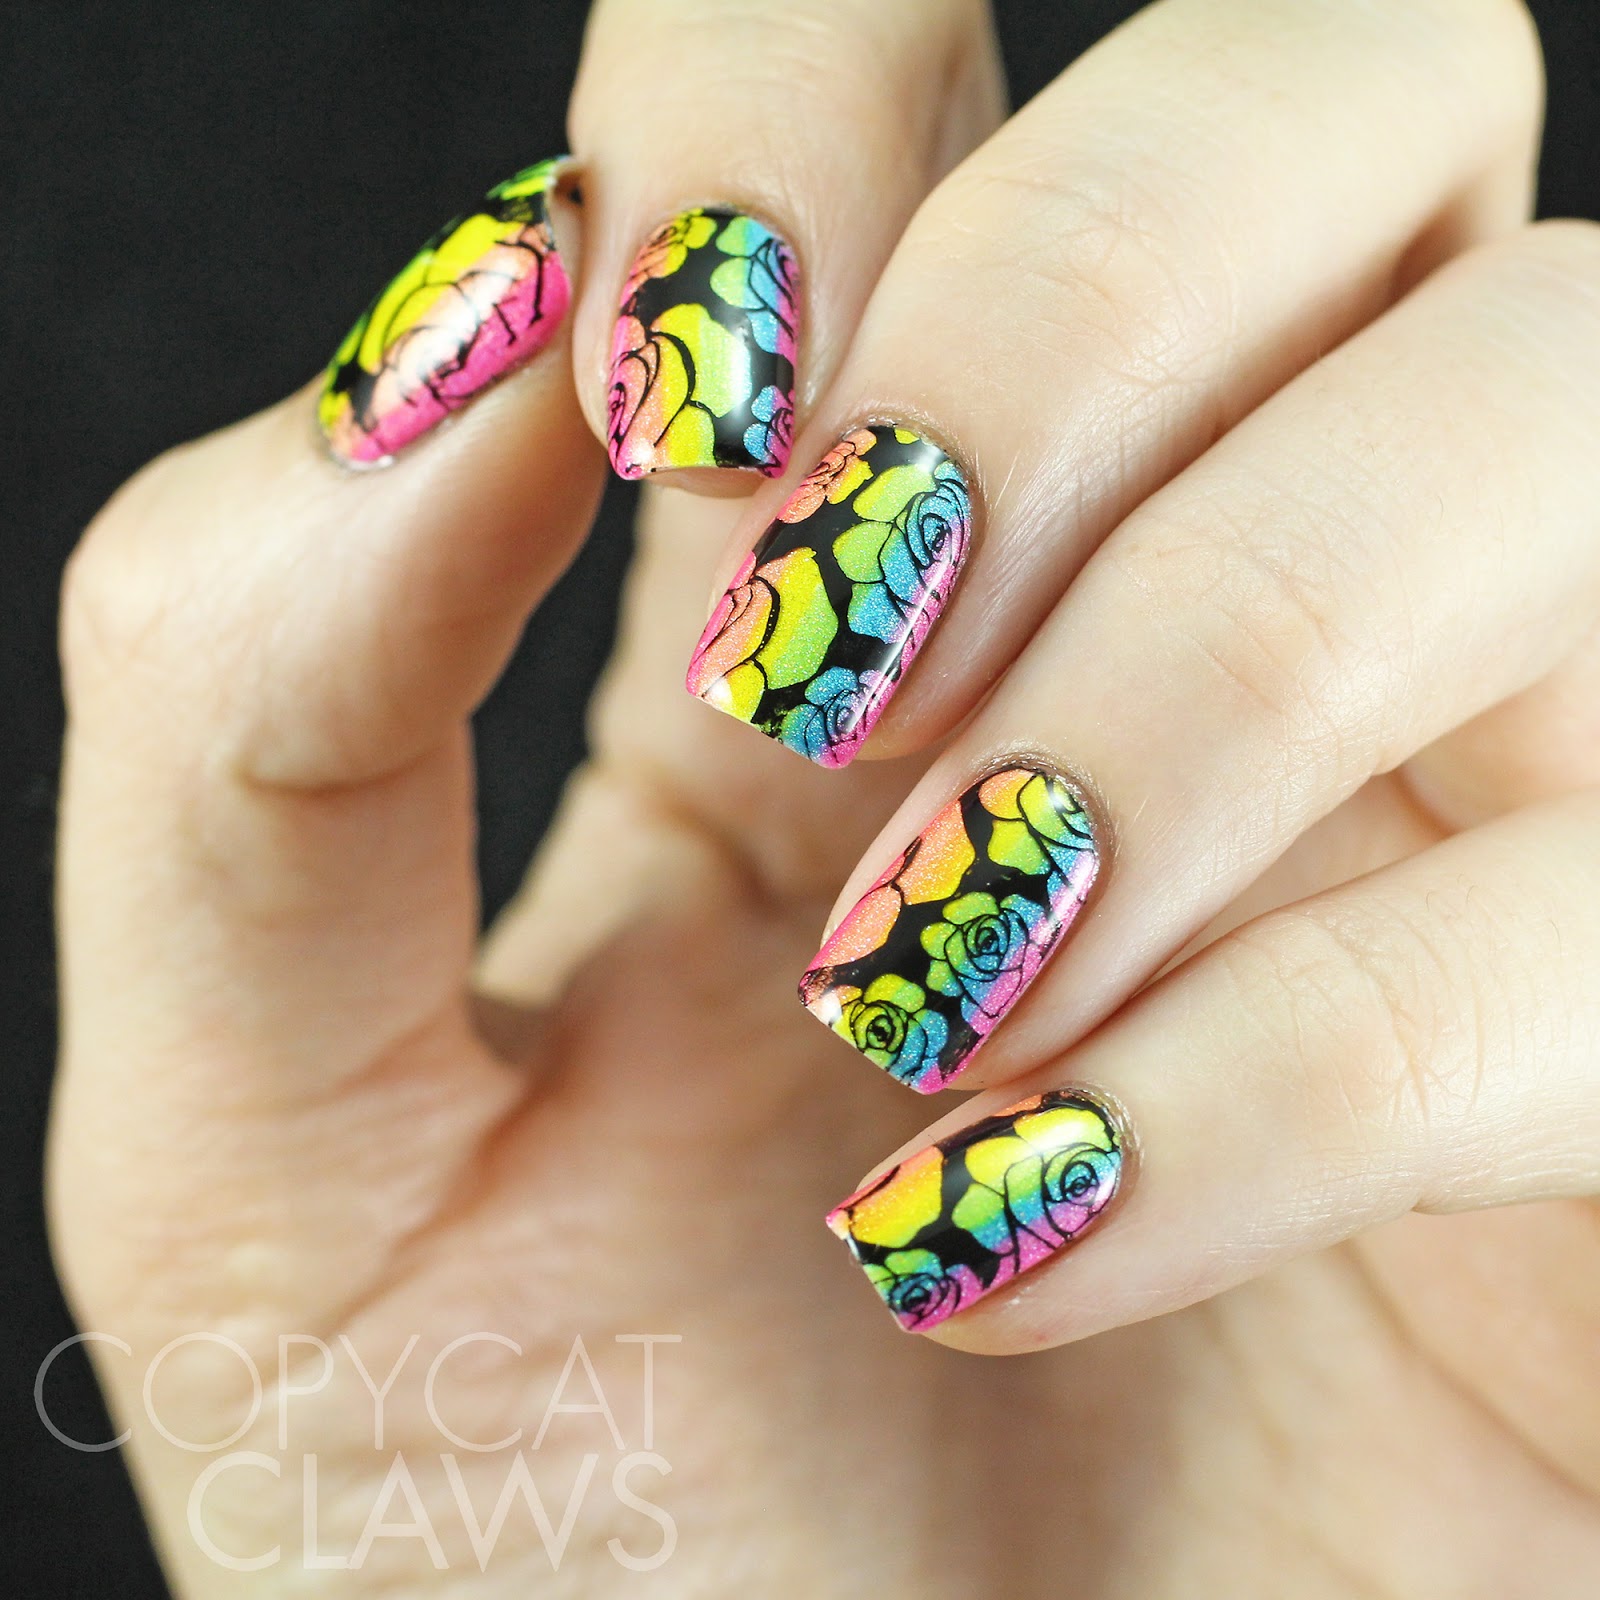 Copycat Claws: Sunday Stamping - Neon Rainbow Roses